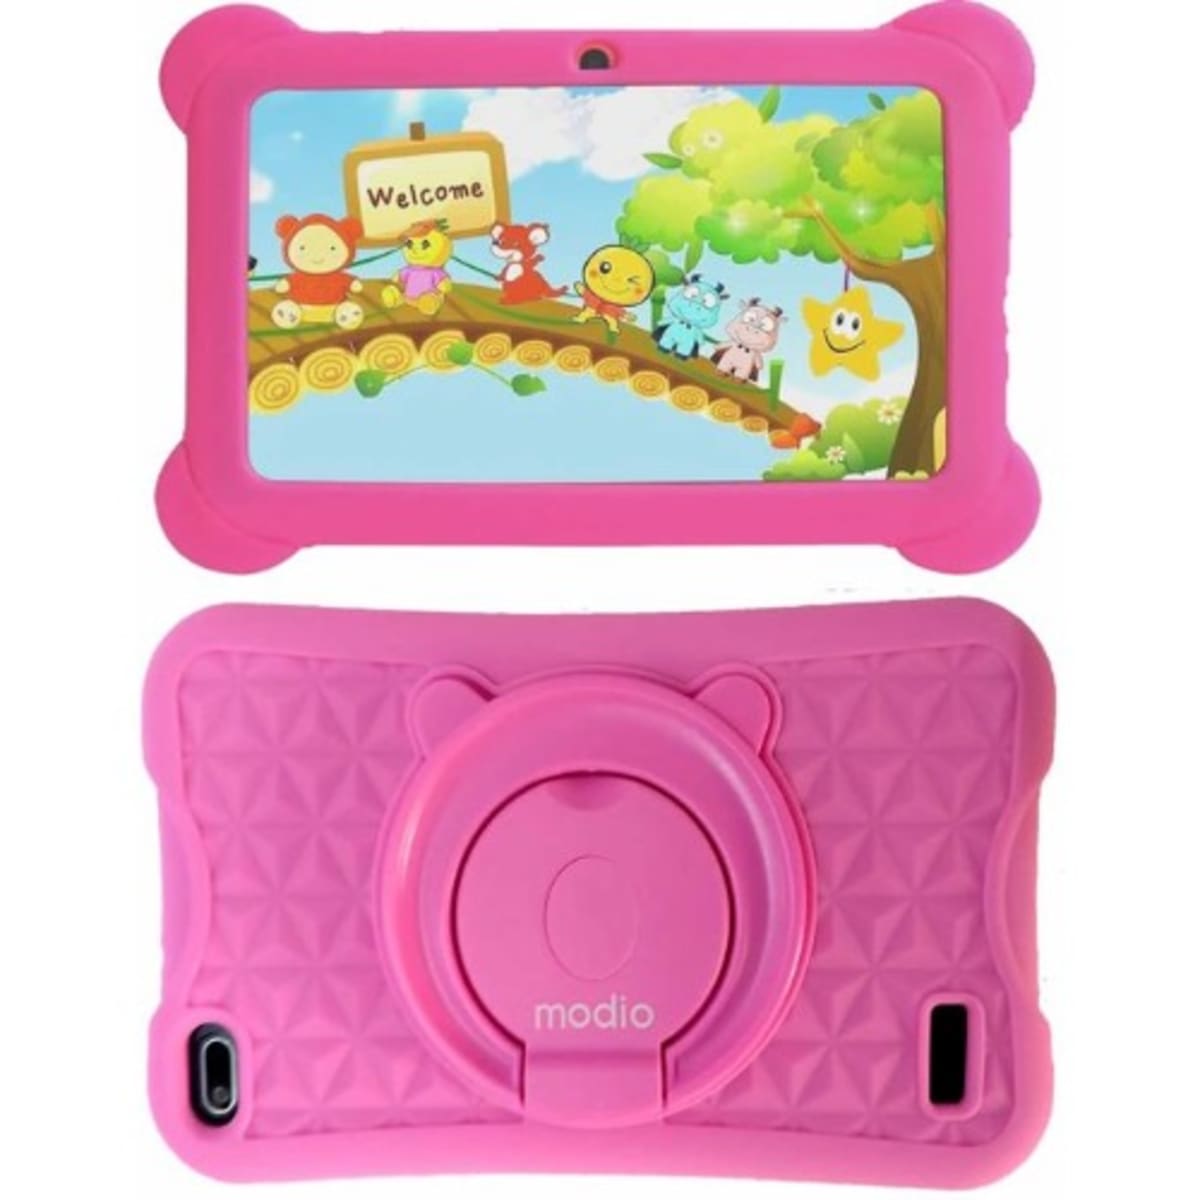 Modio - M730 - 4GB + 64GB - Dual Sim Kids Android Tablet 4g Lte - Pink